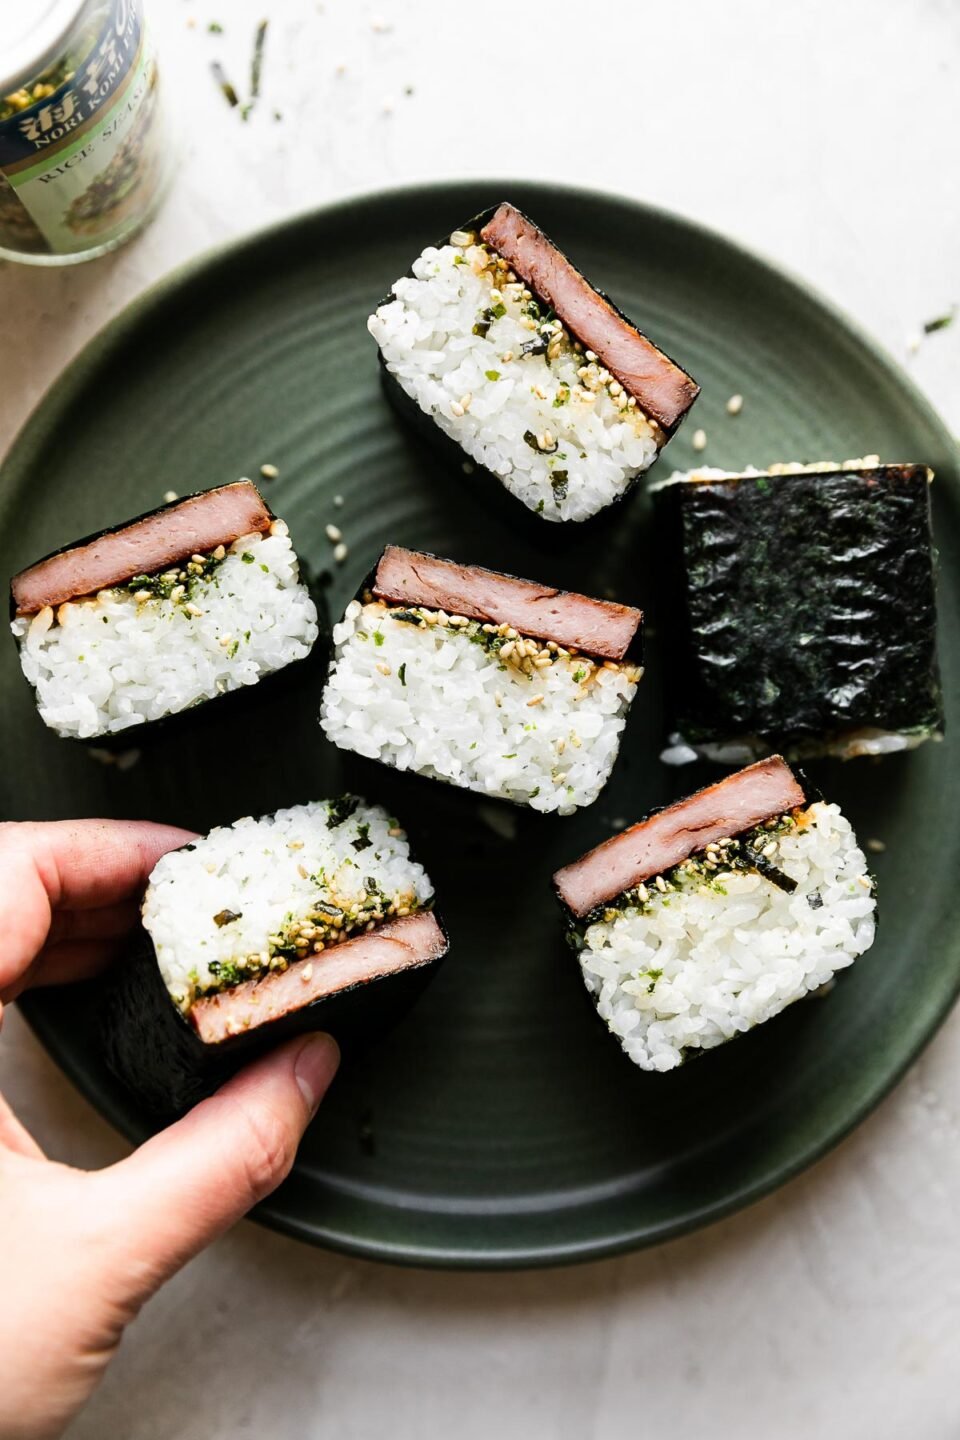 Six finished spam musubi are arranged atop a green ceramic plate. The plate sits atop a creamy white textured surface. A container of Furikake seasoning rests alongside the plate, while a woman's hand reaches for one of the musubi.